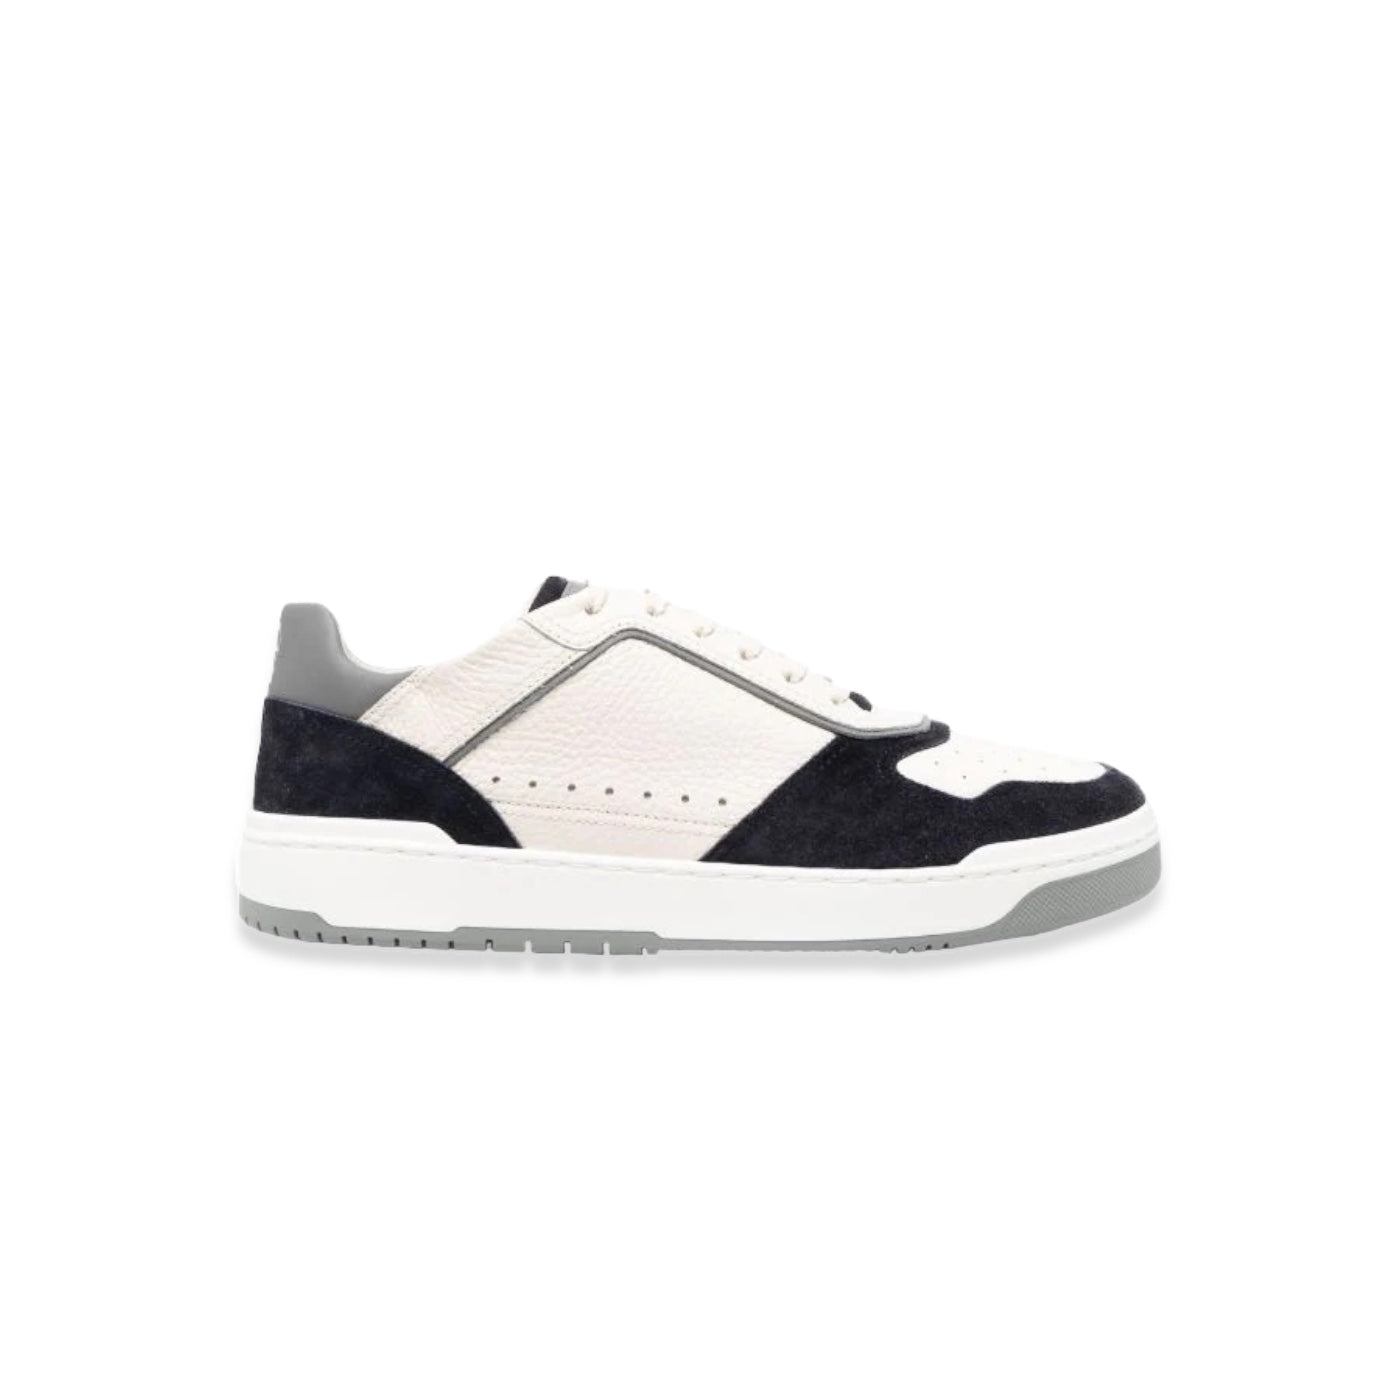 Brunello Cucinelli - Leather Sneakers White Navy